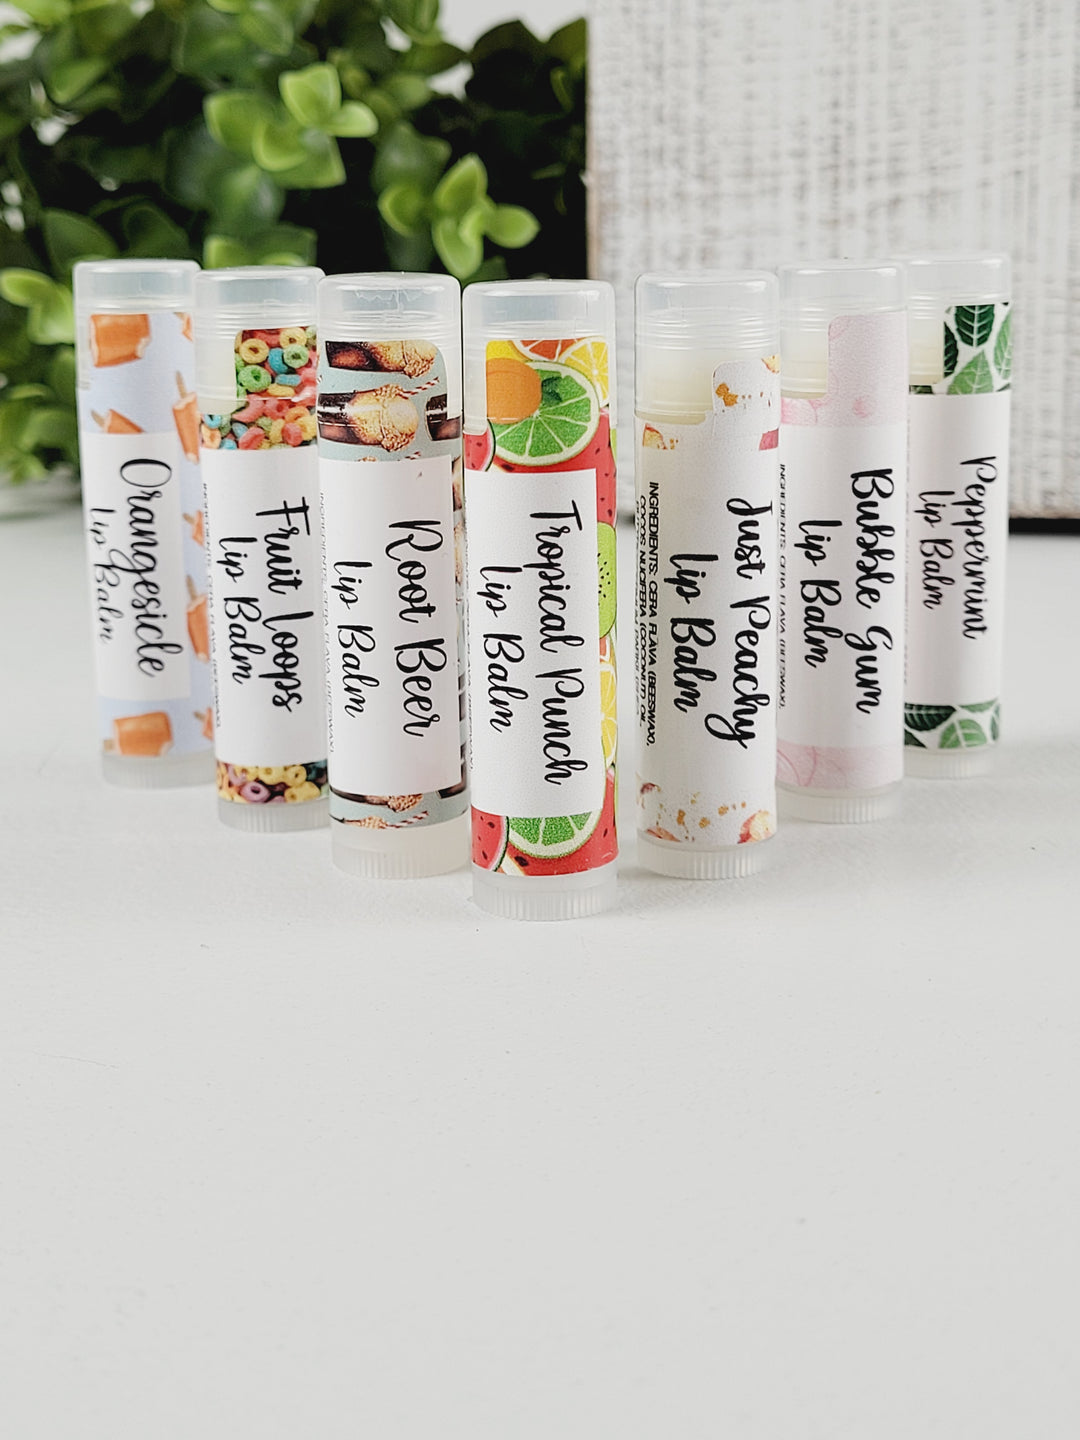 Peachy Clean Lip Balms - Click for Flavours